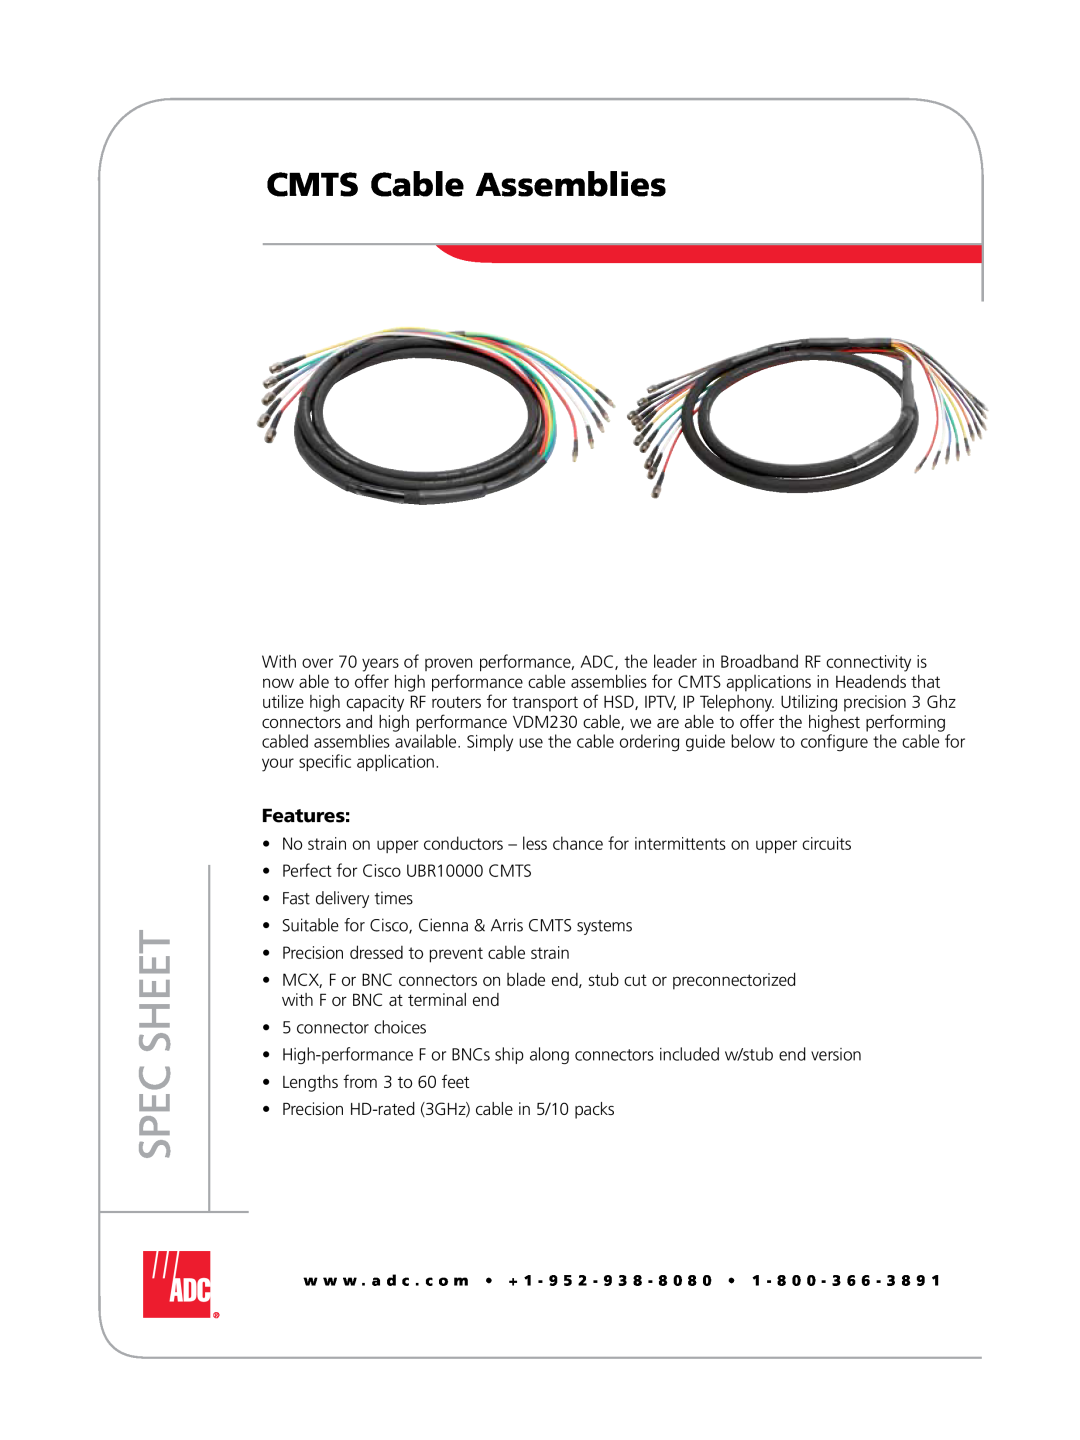 ADC manual CMTS Cable Assemblies, Features, Spec Sheet 